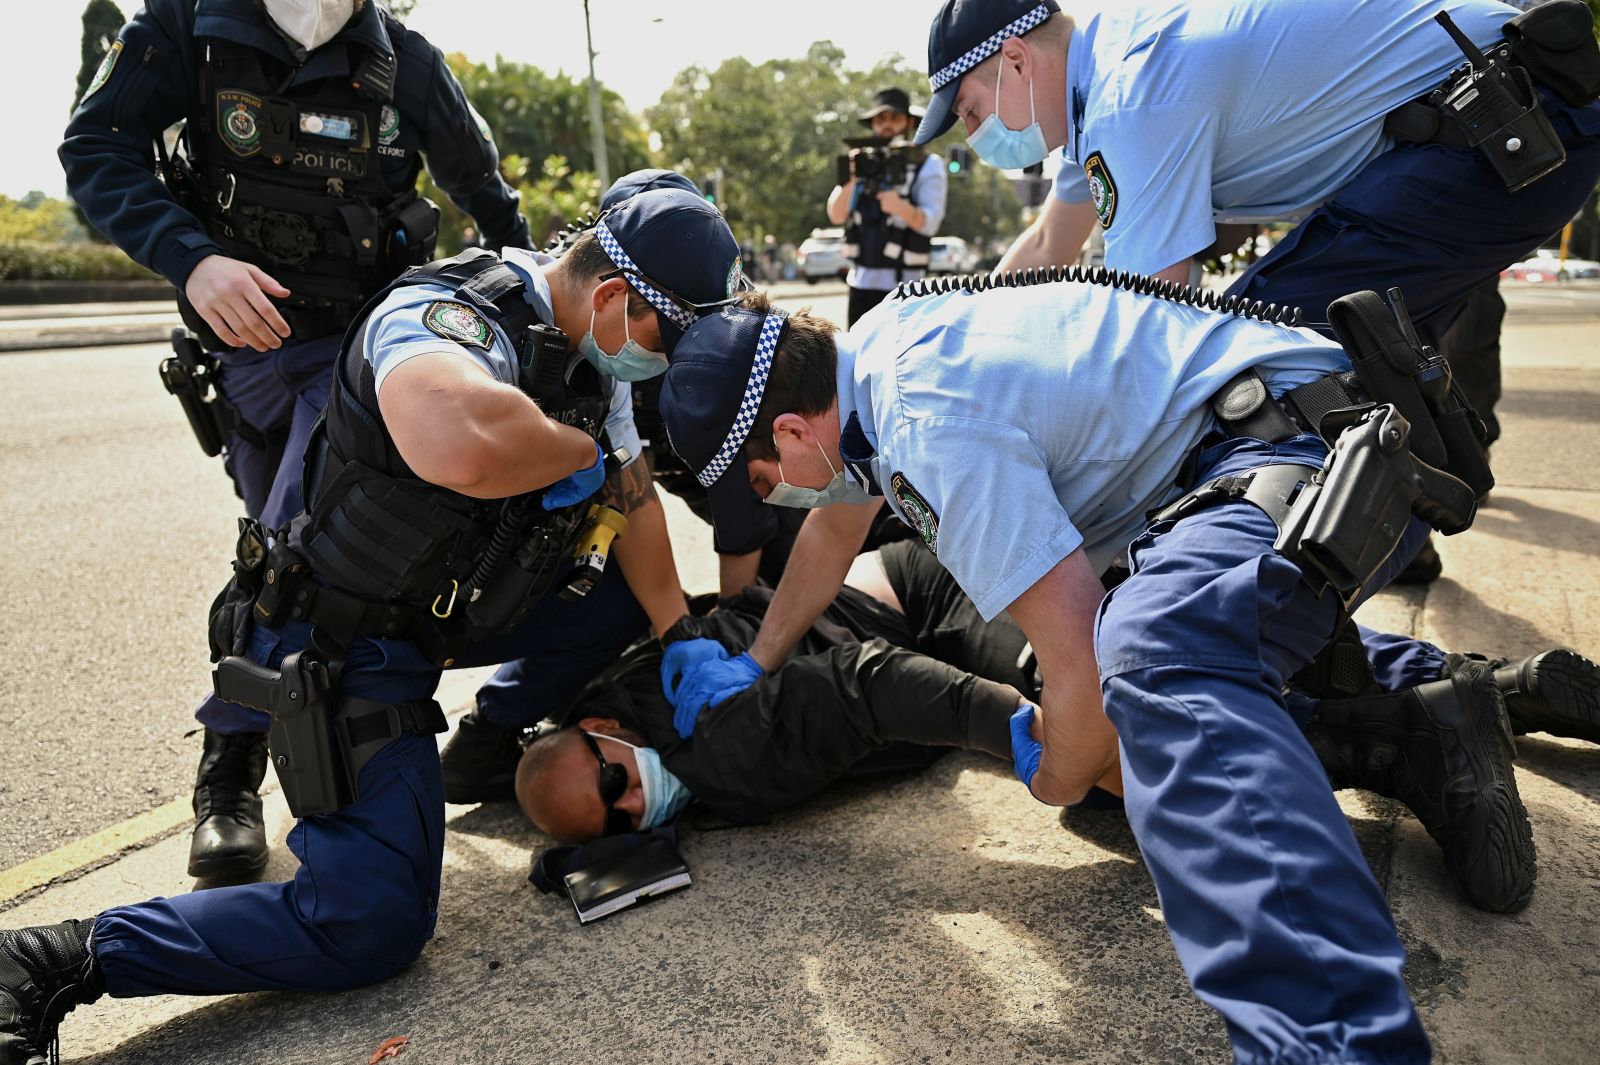 epa09422781 A protester is arrested by police during the 'National Rally for Peace, Freedom and Human Rights' anti-lockdown protest in Sydney, Australia, 21 August 2021. The lockdown in Sydney was extended until the end of September 2021 in an attempt to curb the spread of COVID-19.  EPA/Steven Saphore AUSTRALIA AND NEW ZEALAND OUT